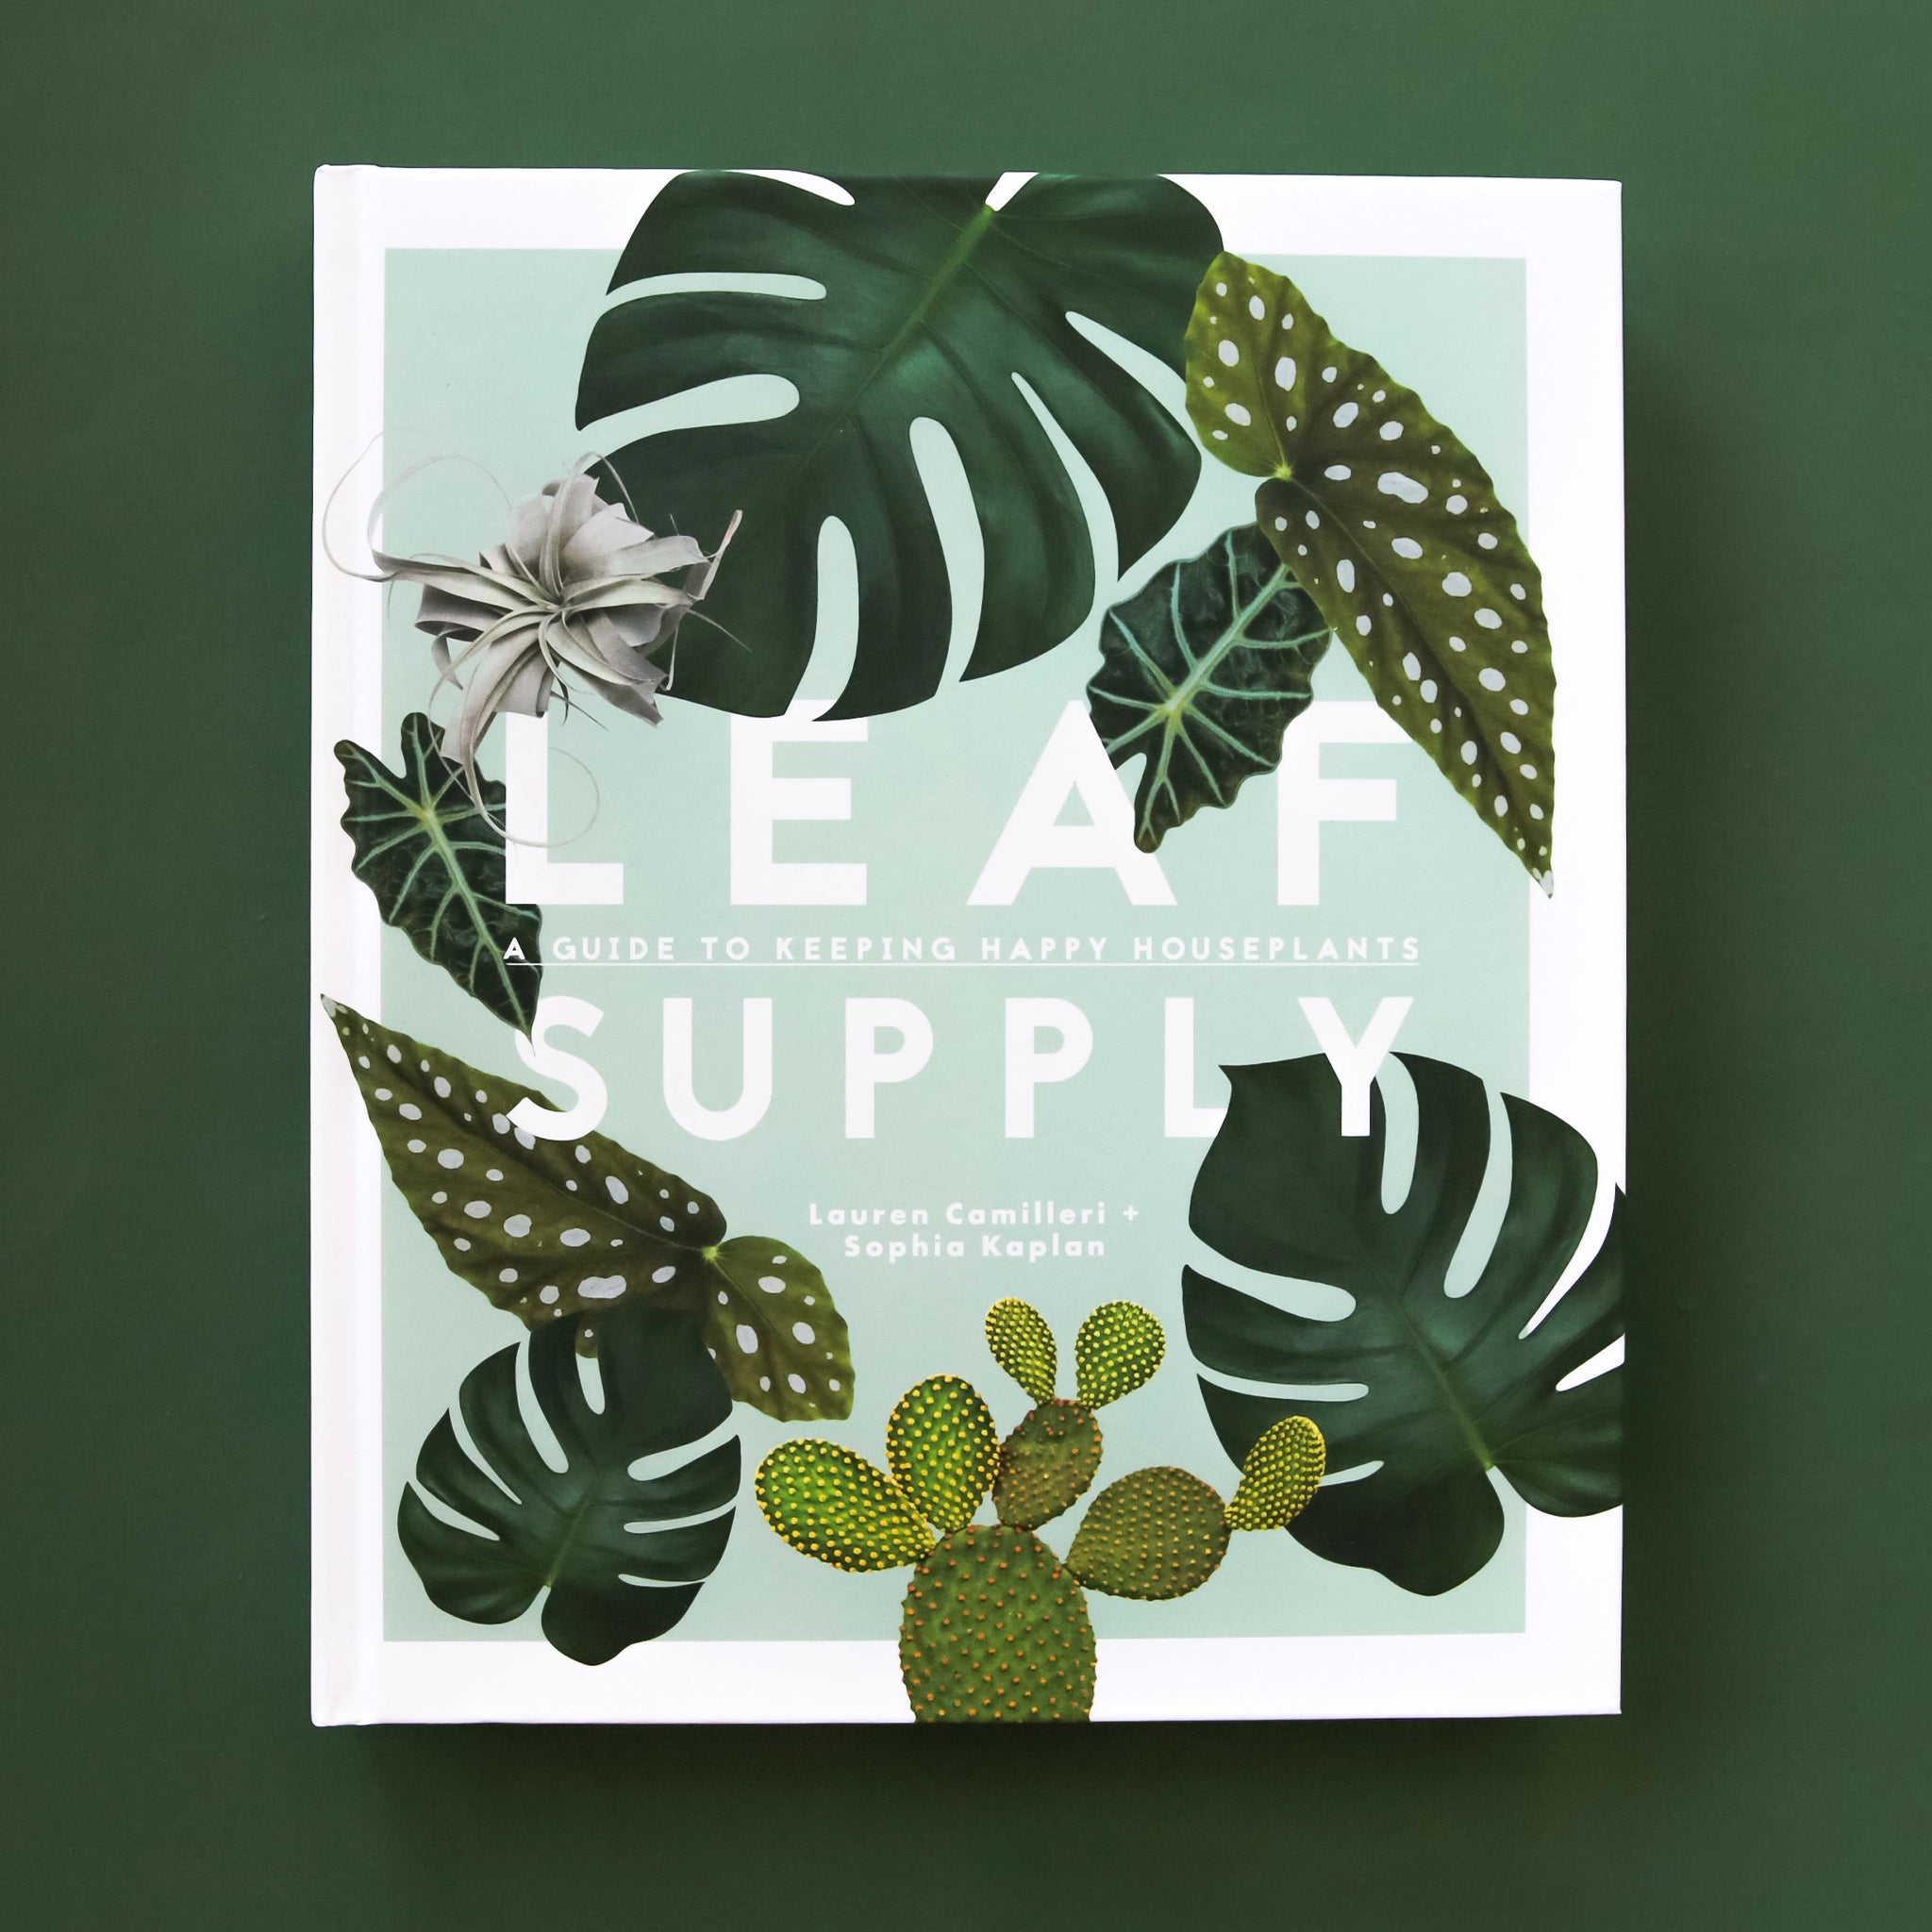 On a green background is a photograph of a mint green book cover with various house plant leaves on the front as well as white text that reads, "Lead Supply A Guide To Keeping Happy House Plants".